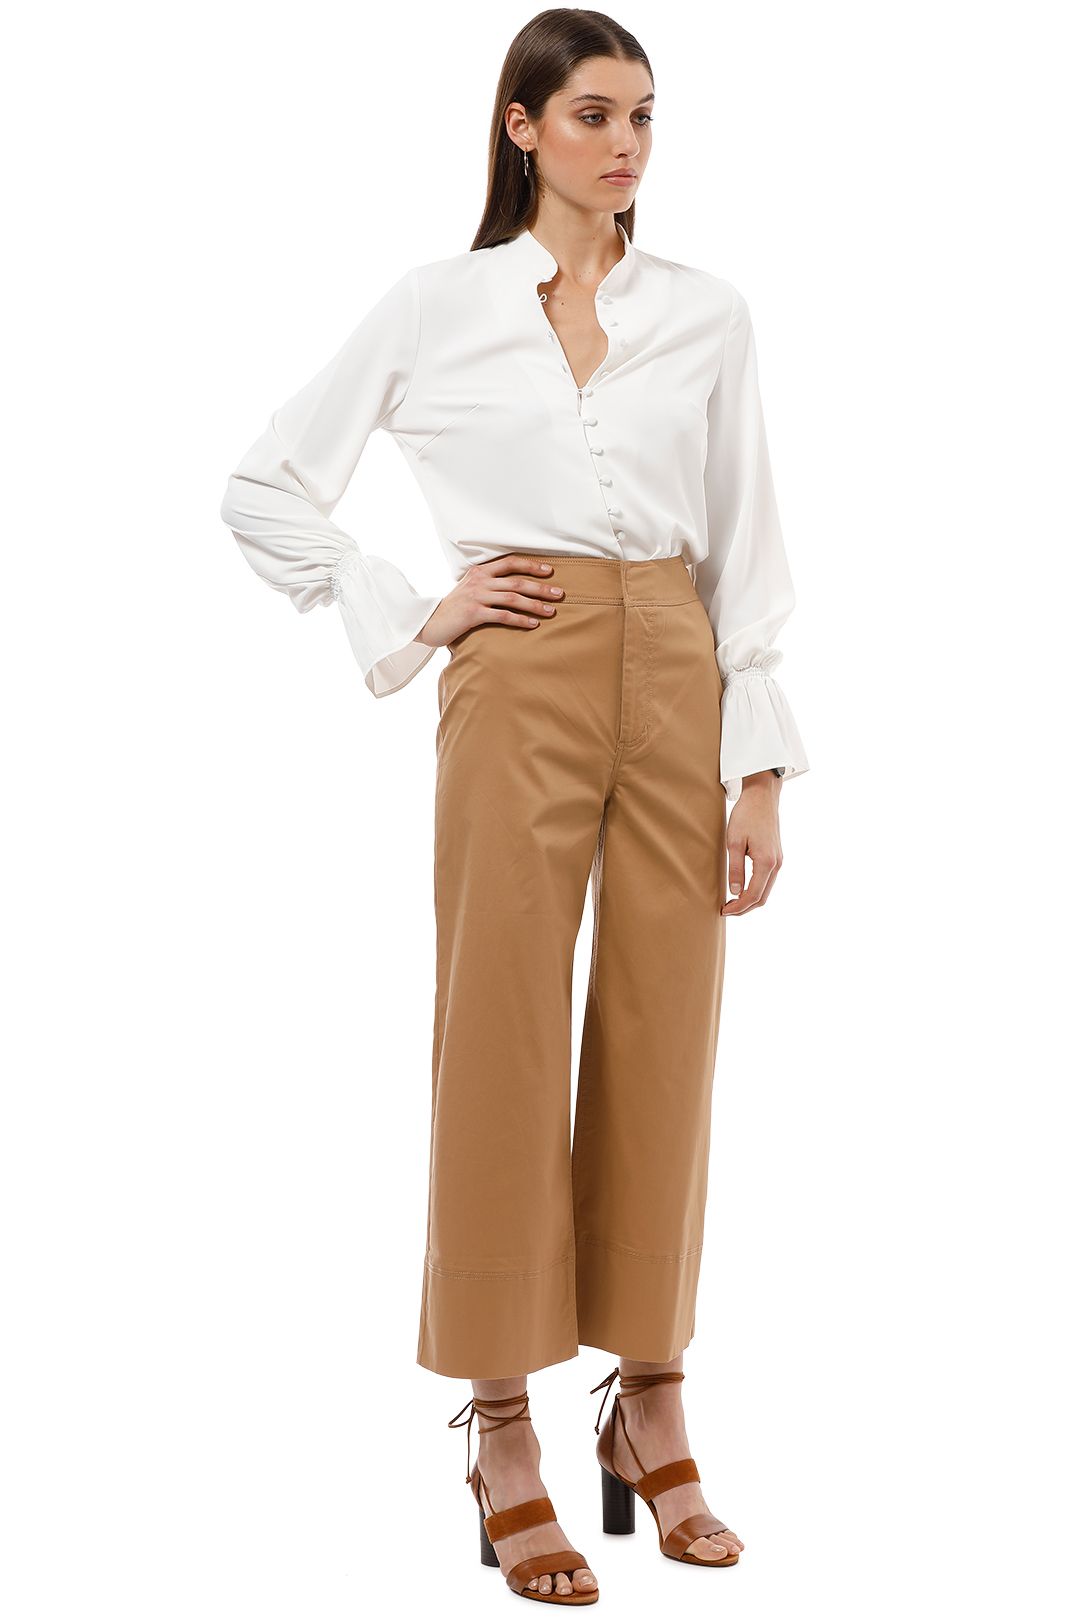 CMEO Collective - Adept Pants - Tan - Side